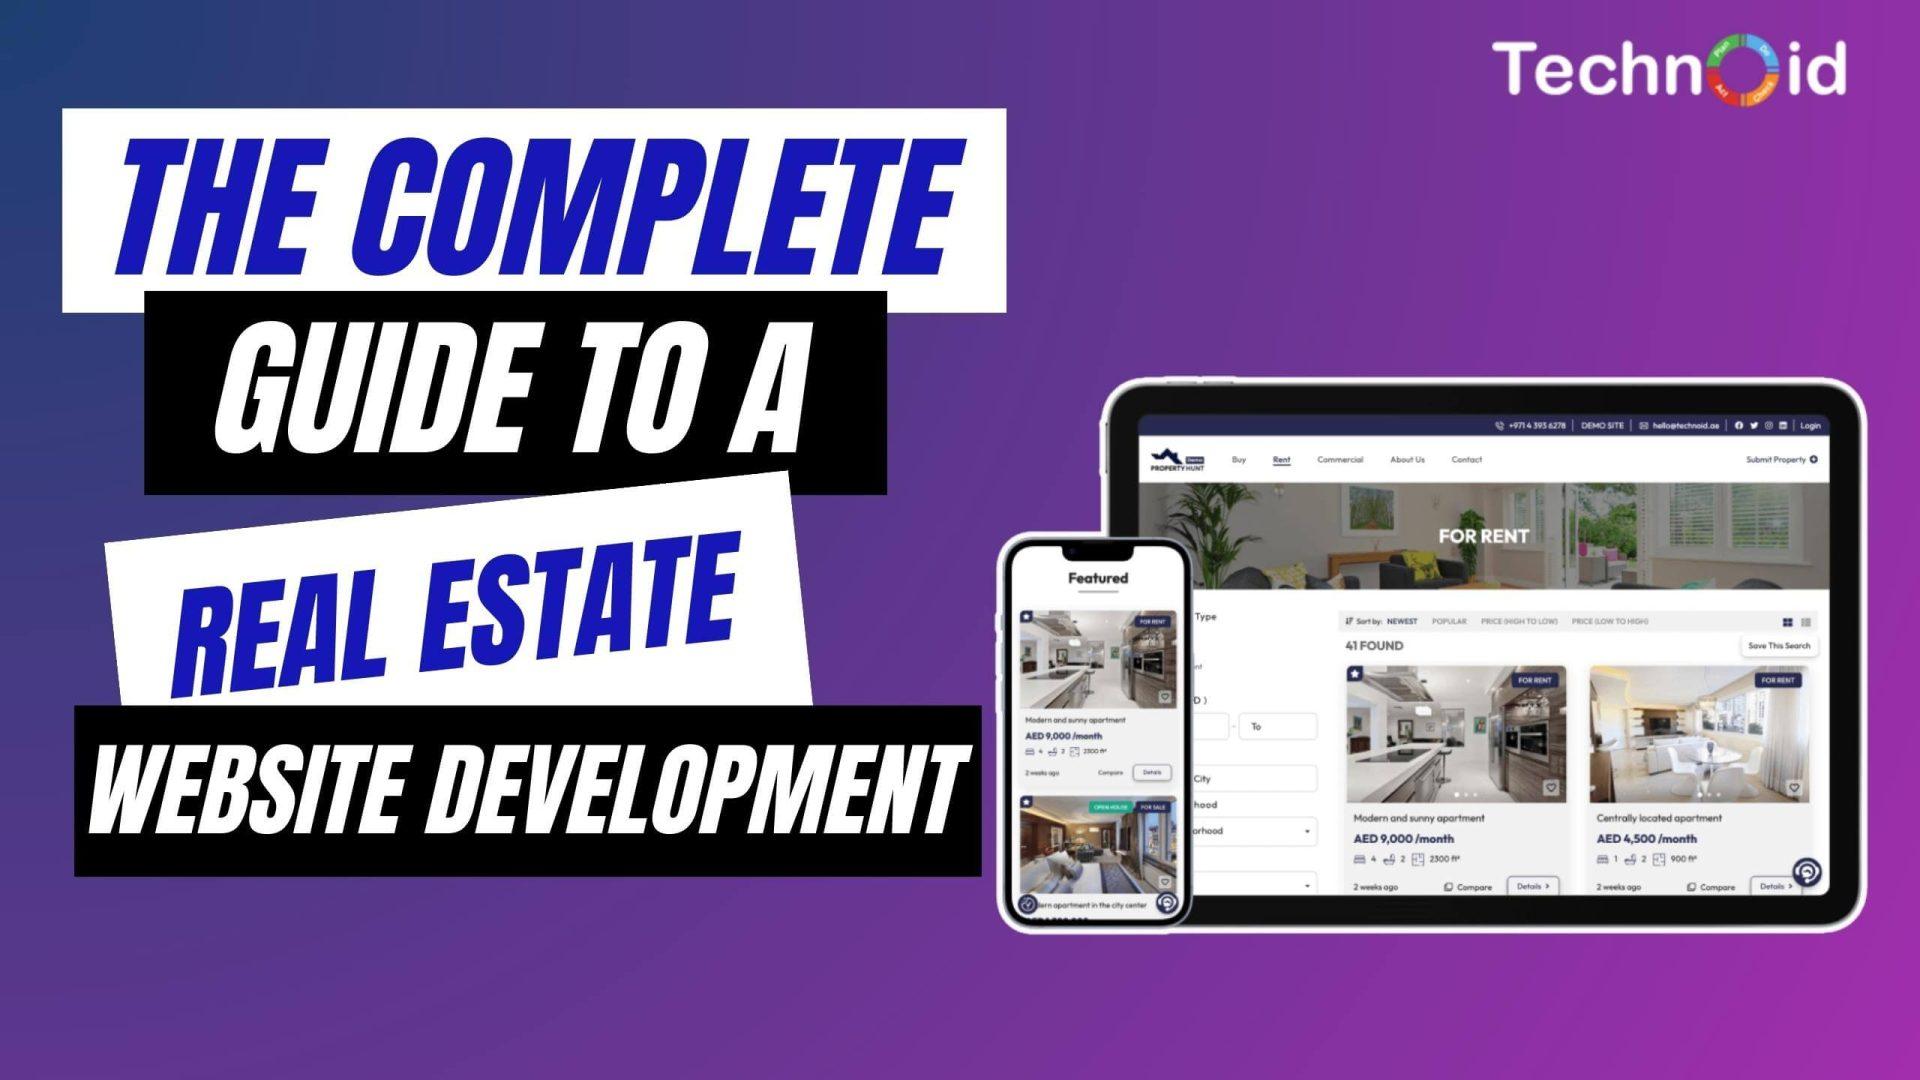 The complete guide to a successful real estate website development.